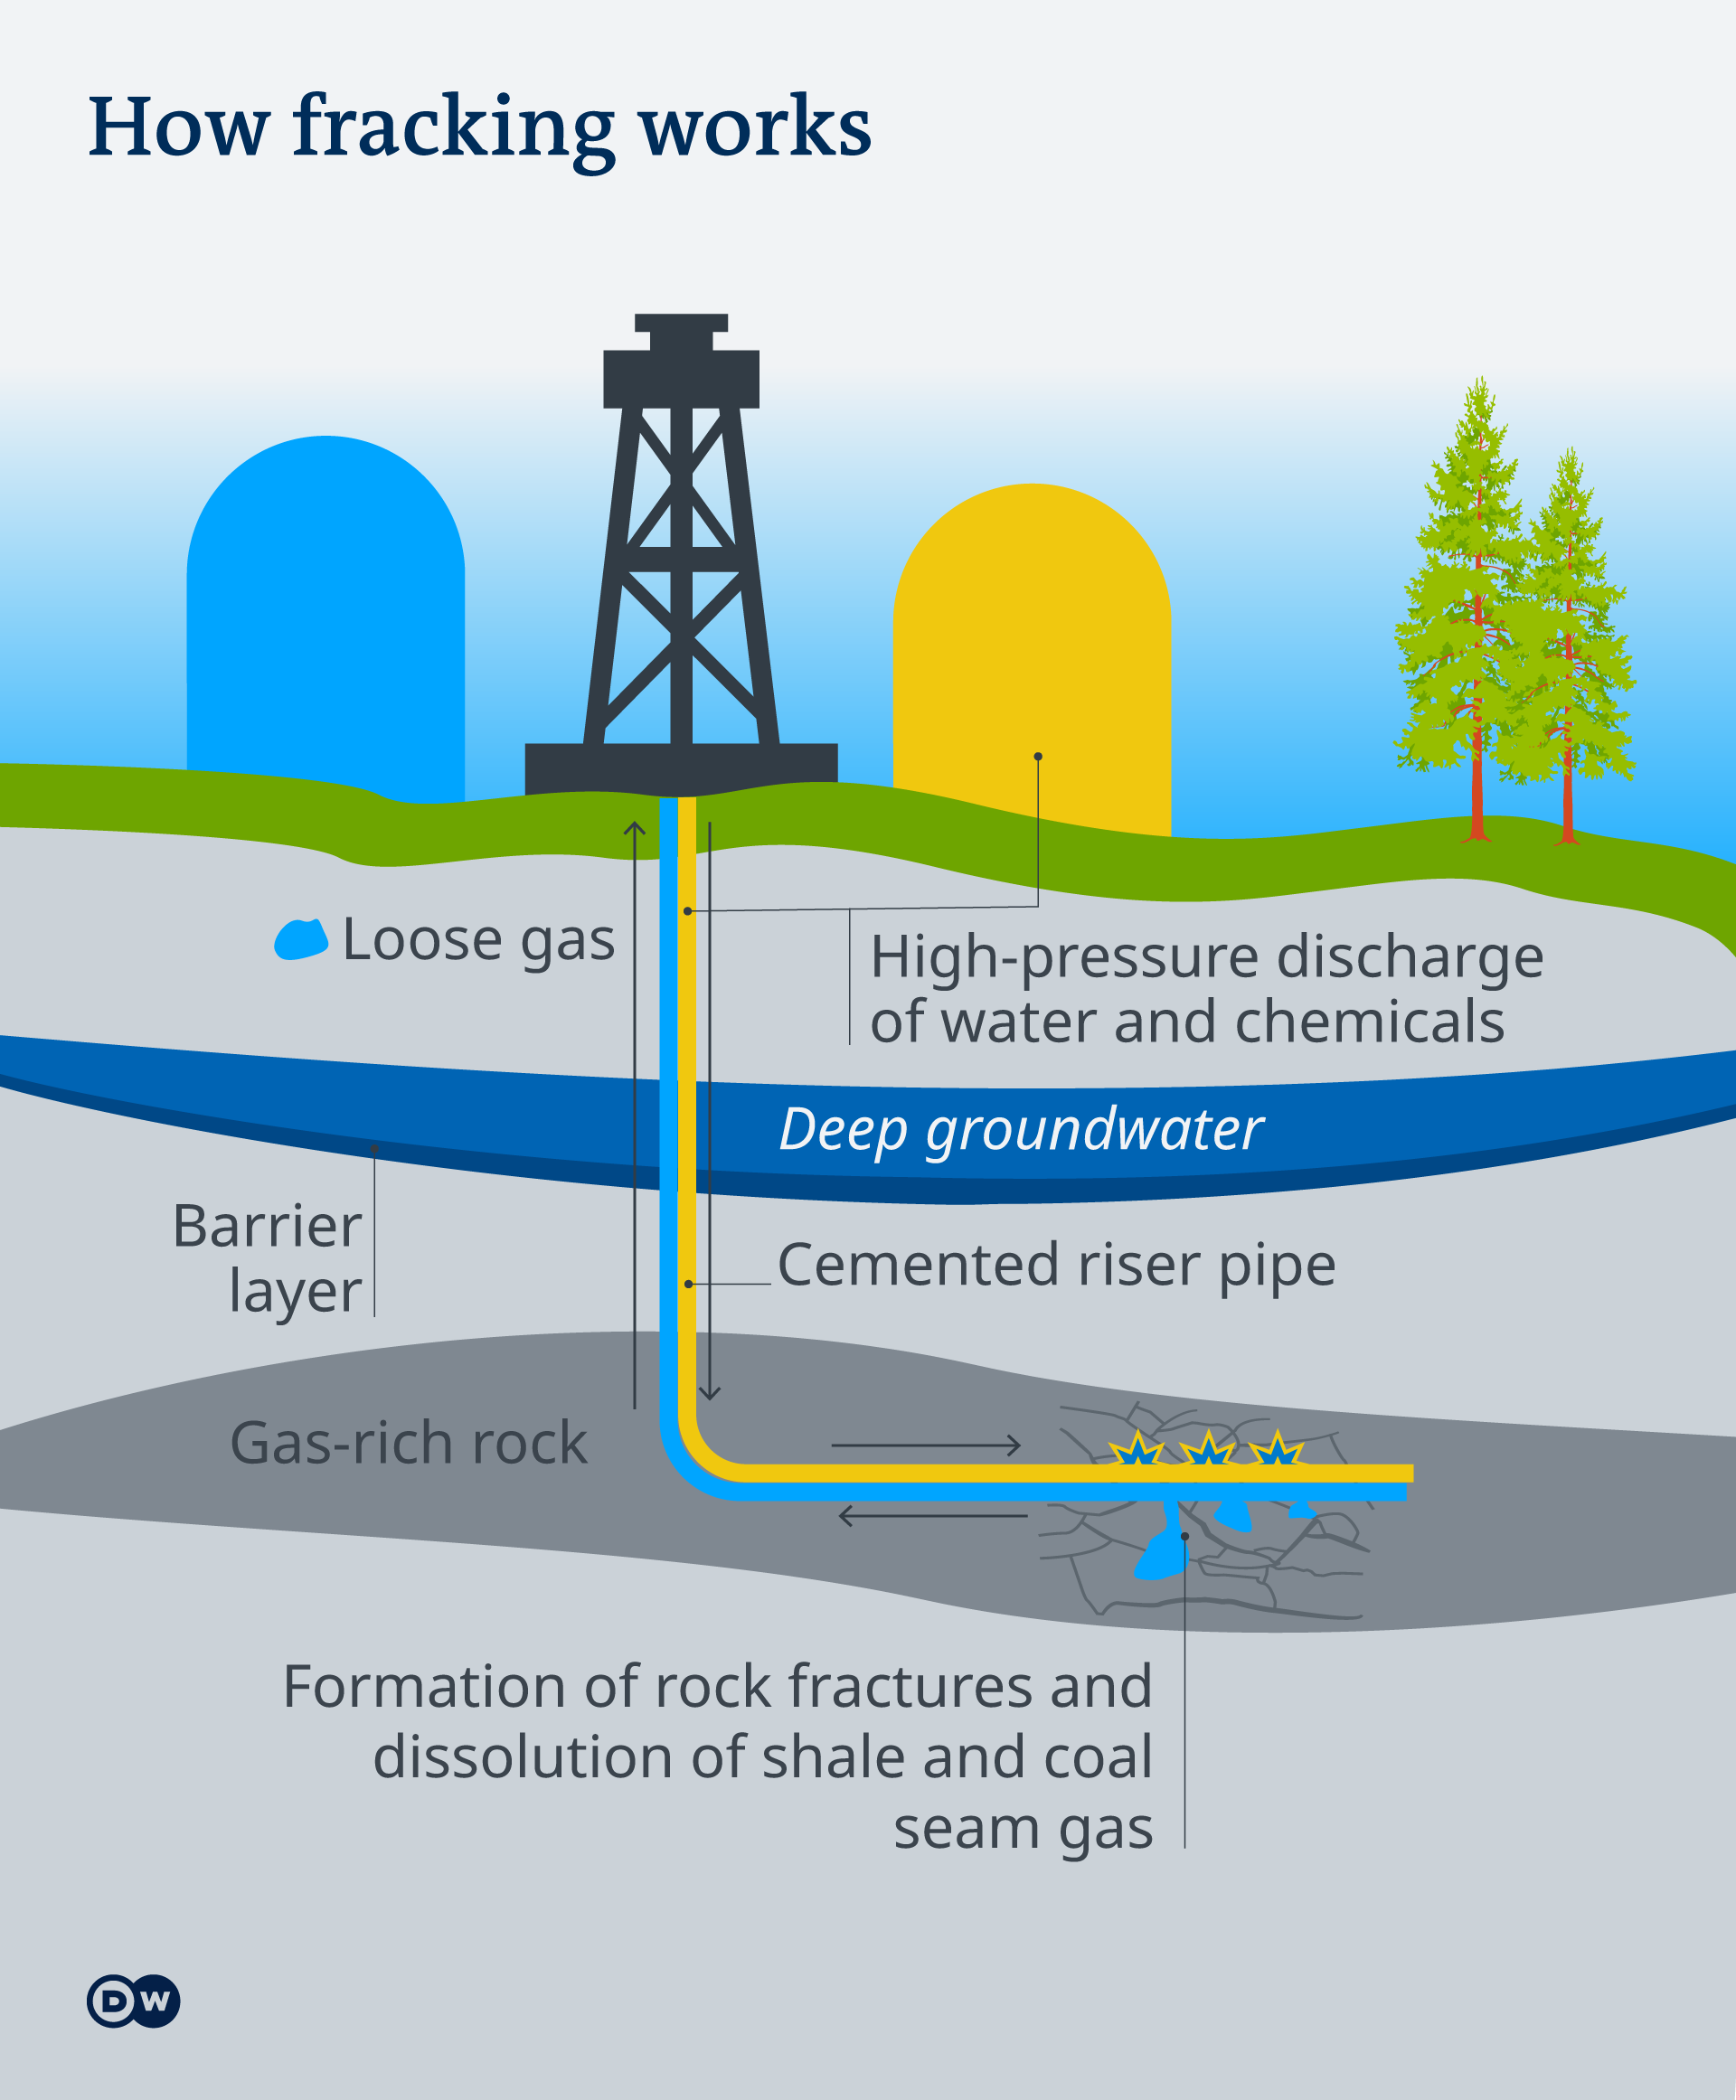 Diagram showing how fracking operates